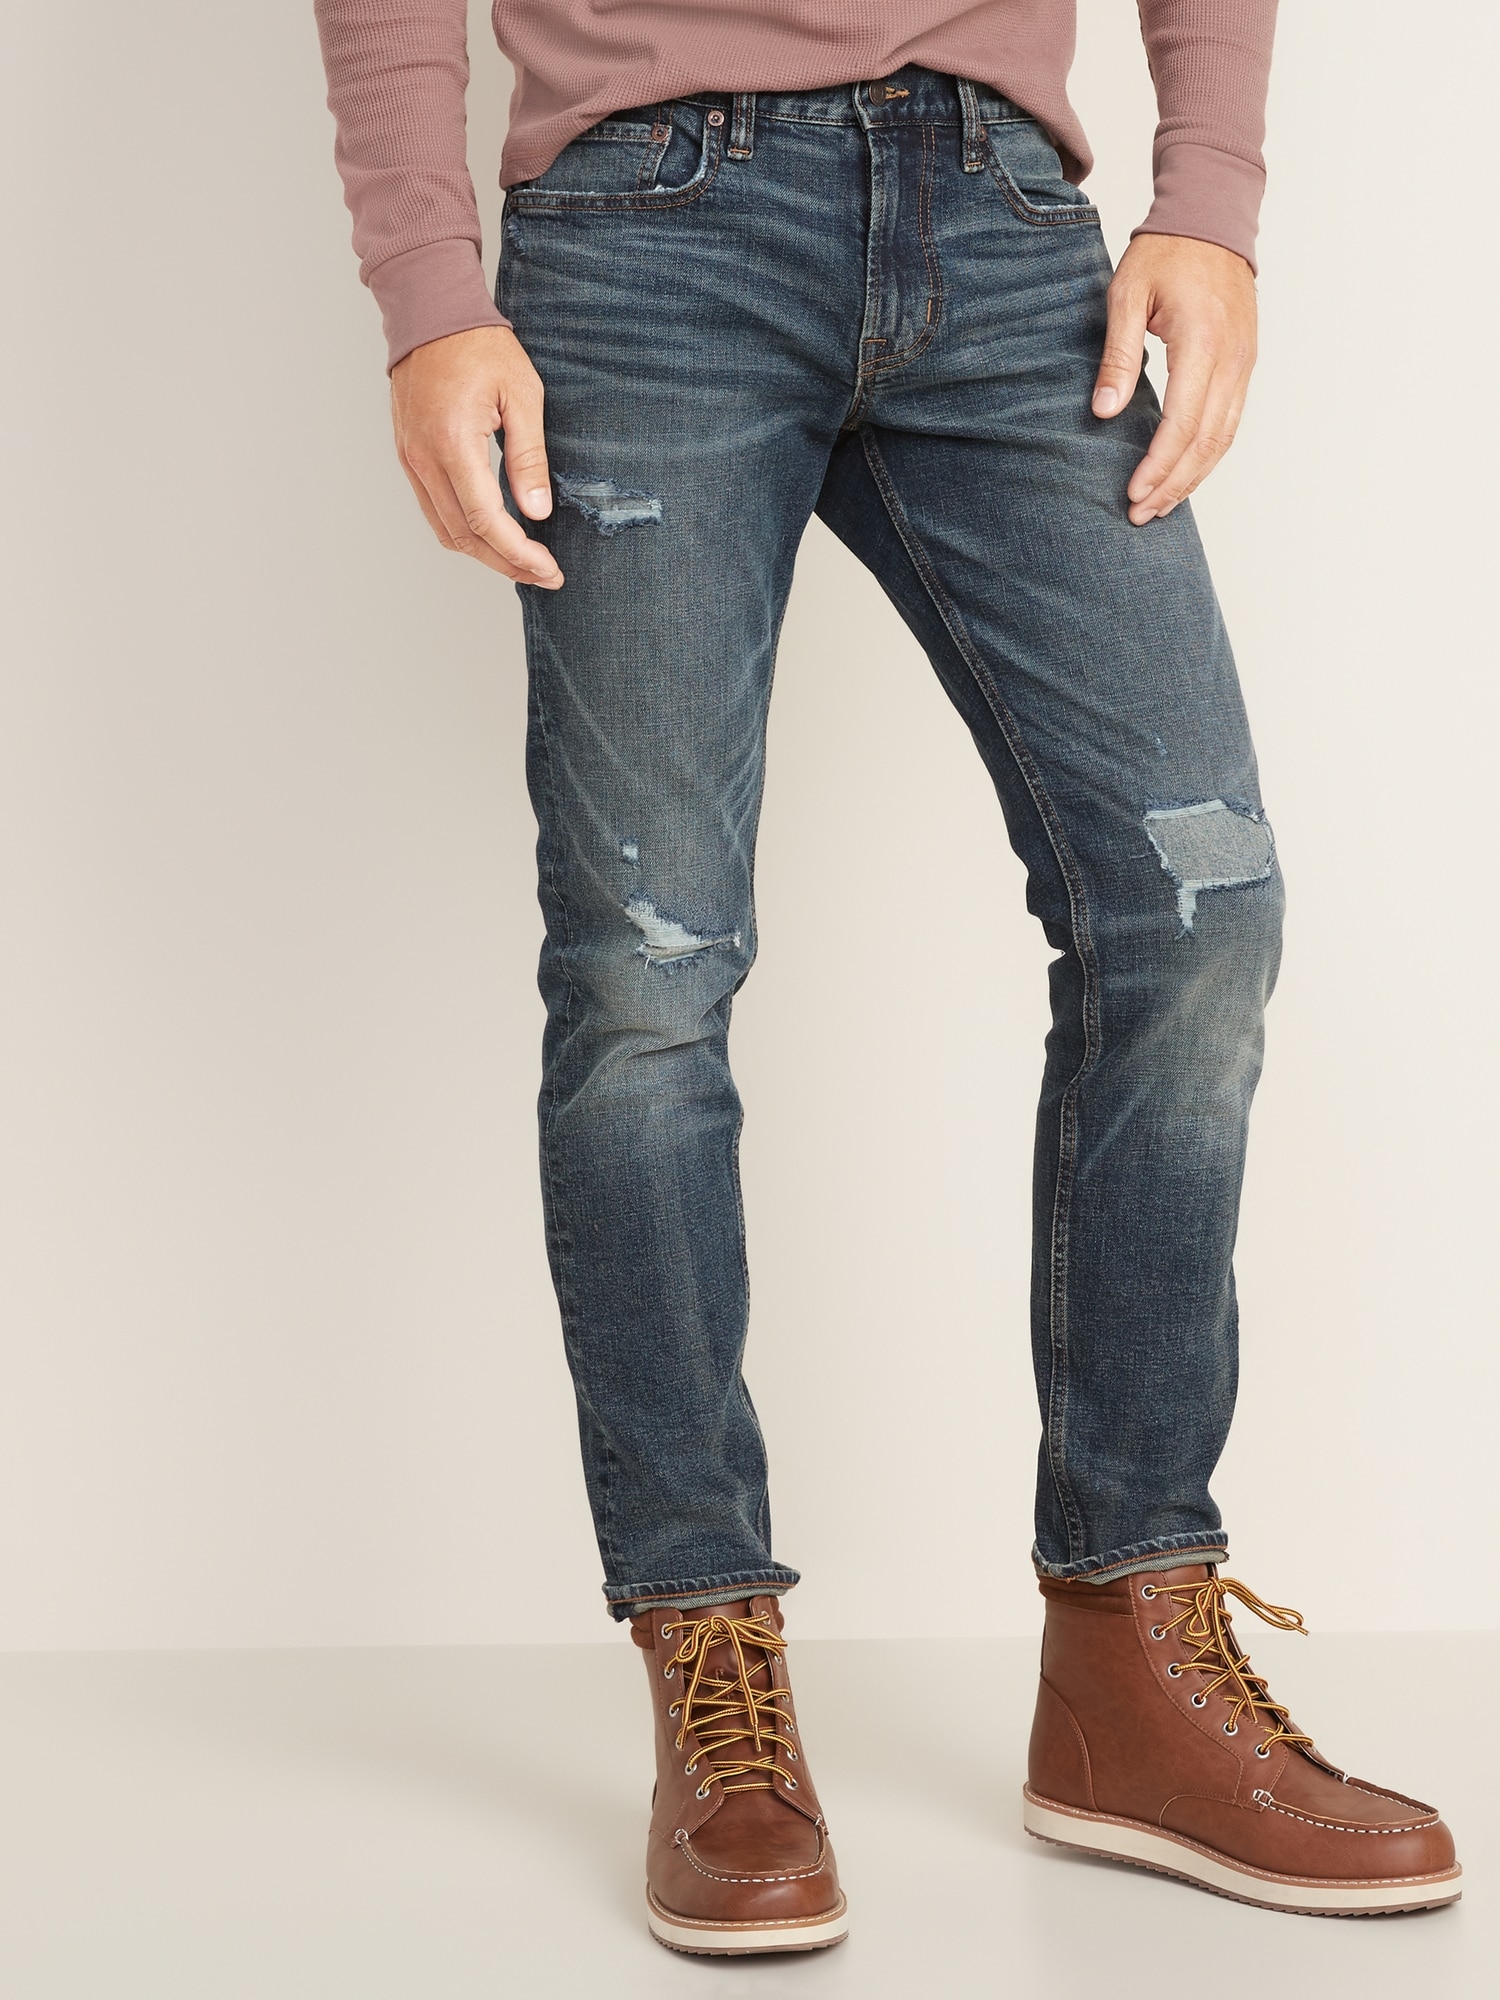 men's relaxed fit distressed jeans